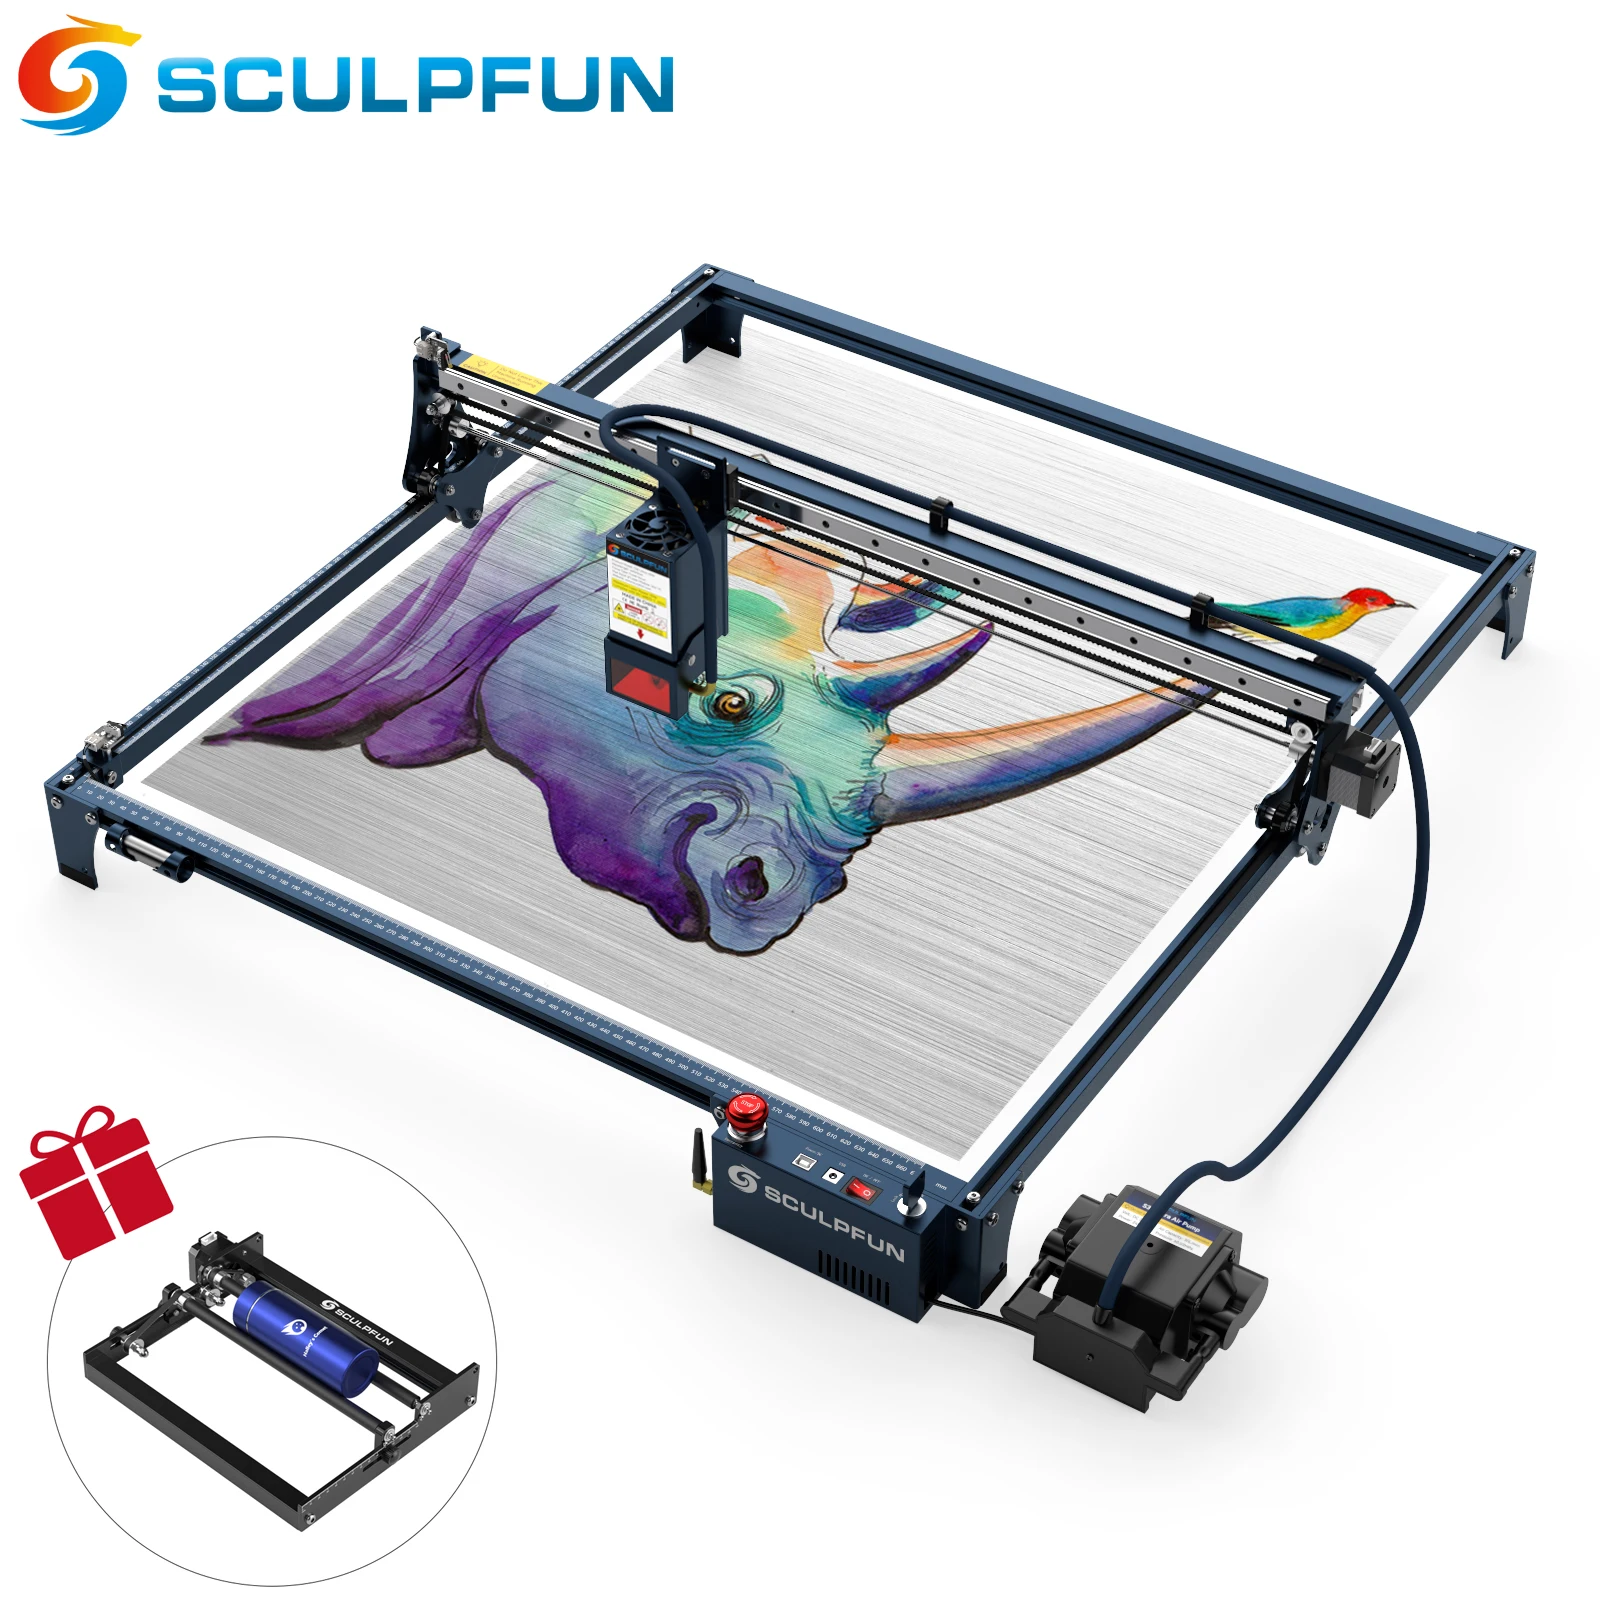 SCULPFUN S30 Ultra 11W 22W 33W Laser Engraving Machine 600x600mm Work Area Laser Cutter Engraver With Replaceable Protective Len sculpfun s30 ultra 22w laser engraving machine 600x600mm engraving area with automatic air assist replaceable lens